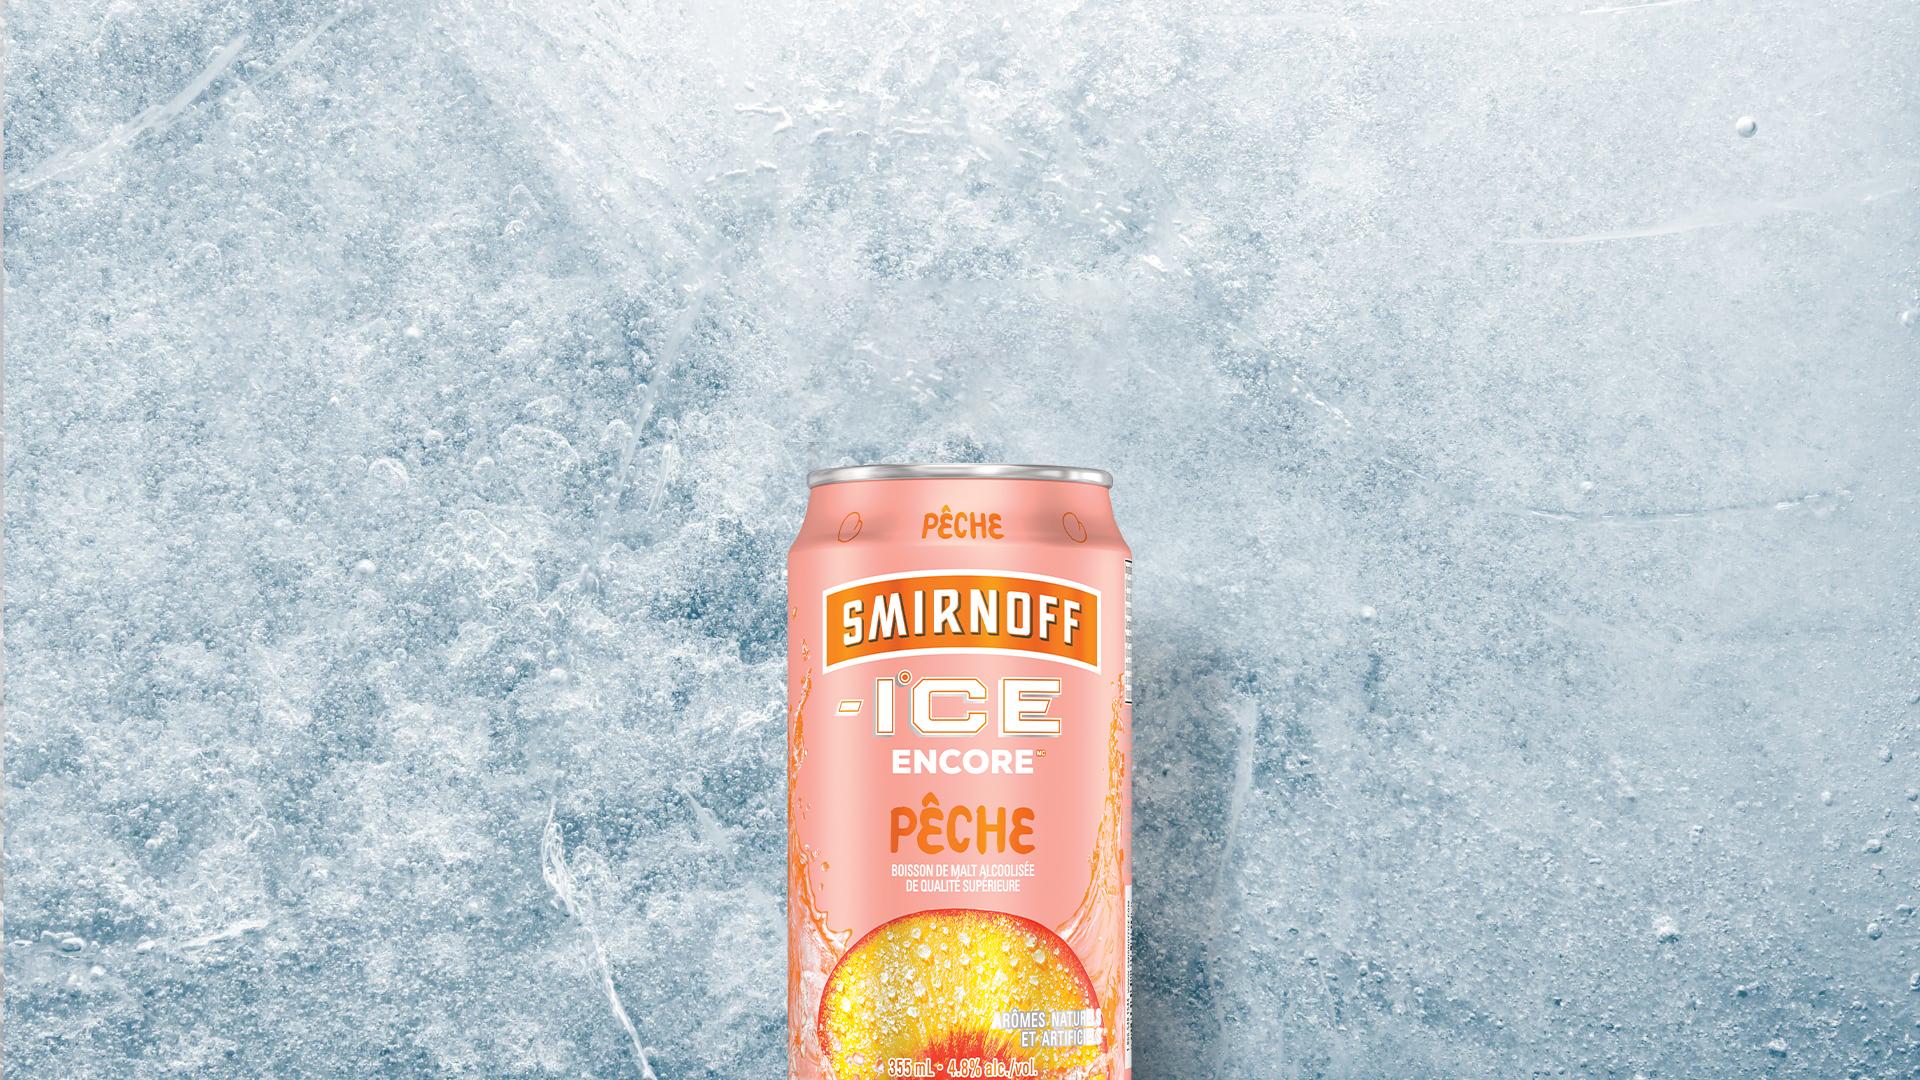 Smirnoff Ice Light White Peach can on a Icy background